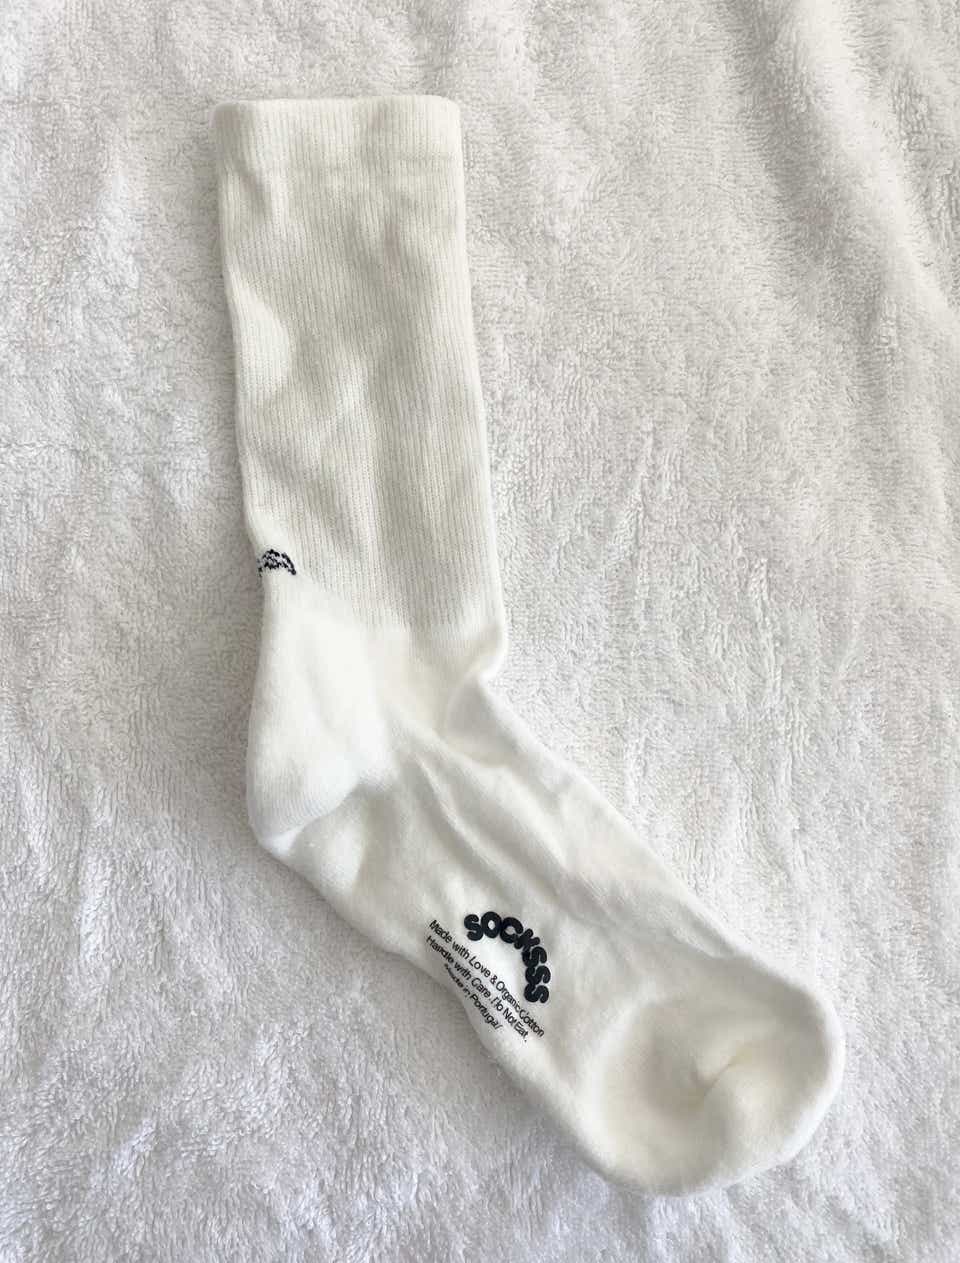 Photo of a white sock.